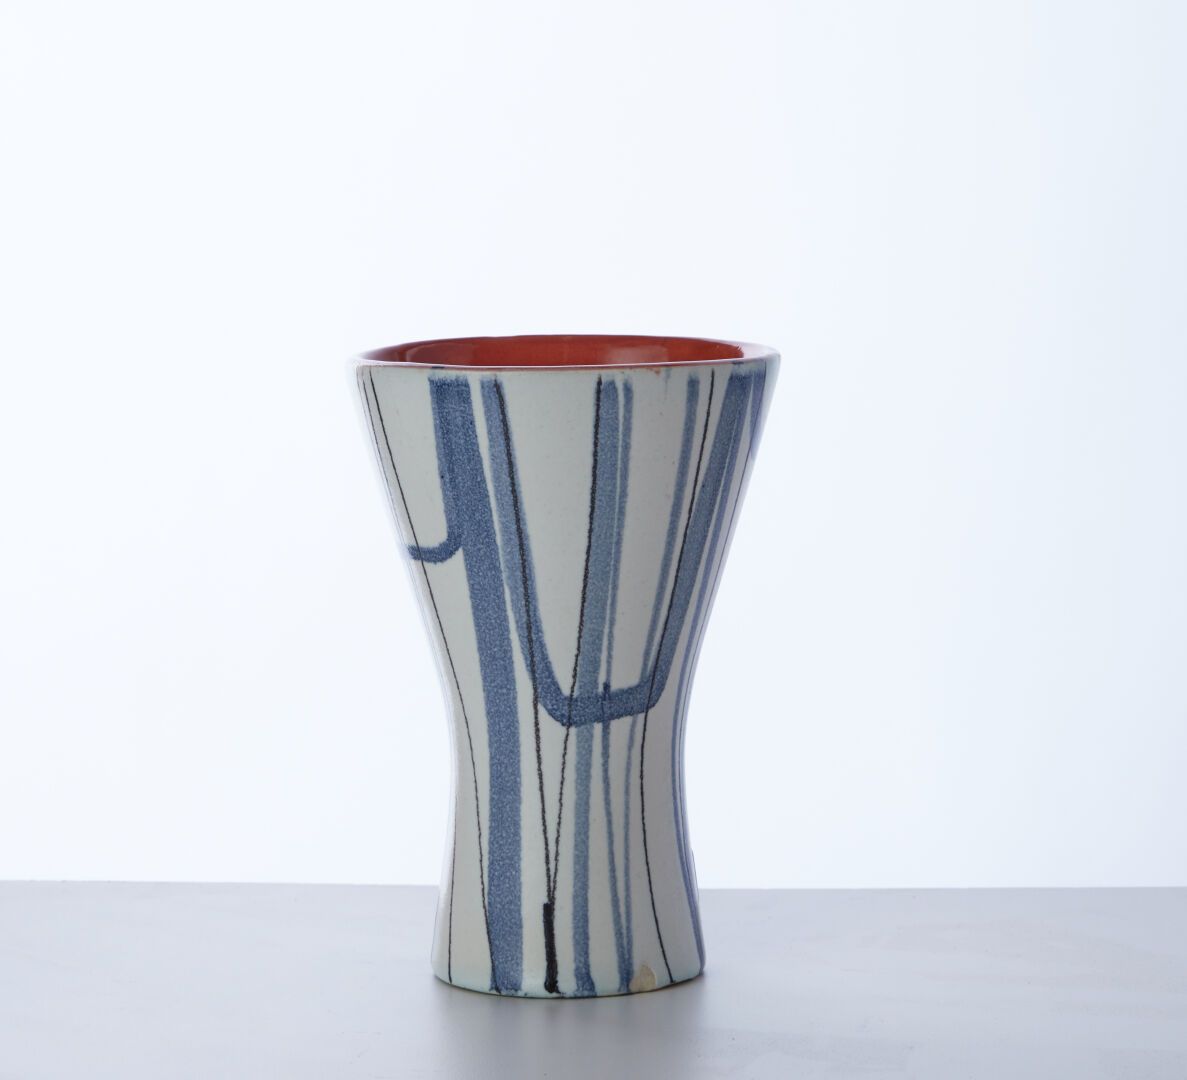 Null CAPRON Roger (1922-2006) in Vallauris
Small vase horn in blue and white ena&hellip;